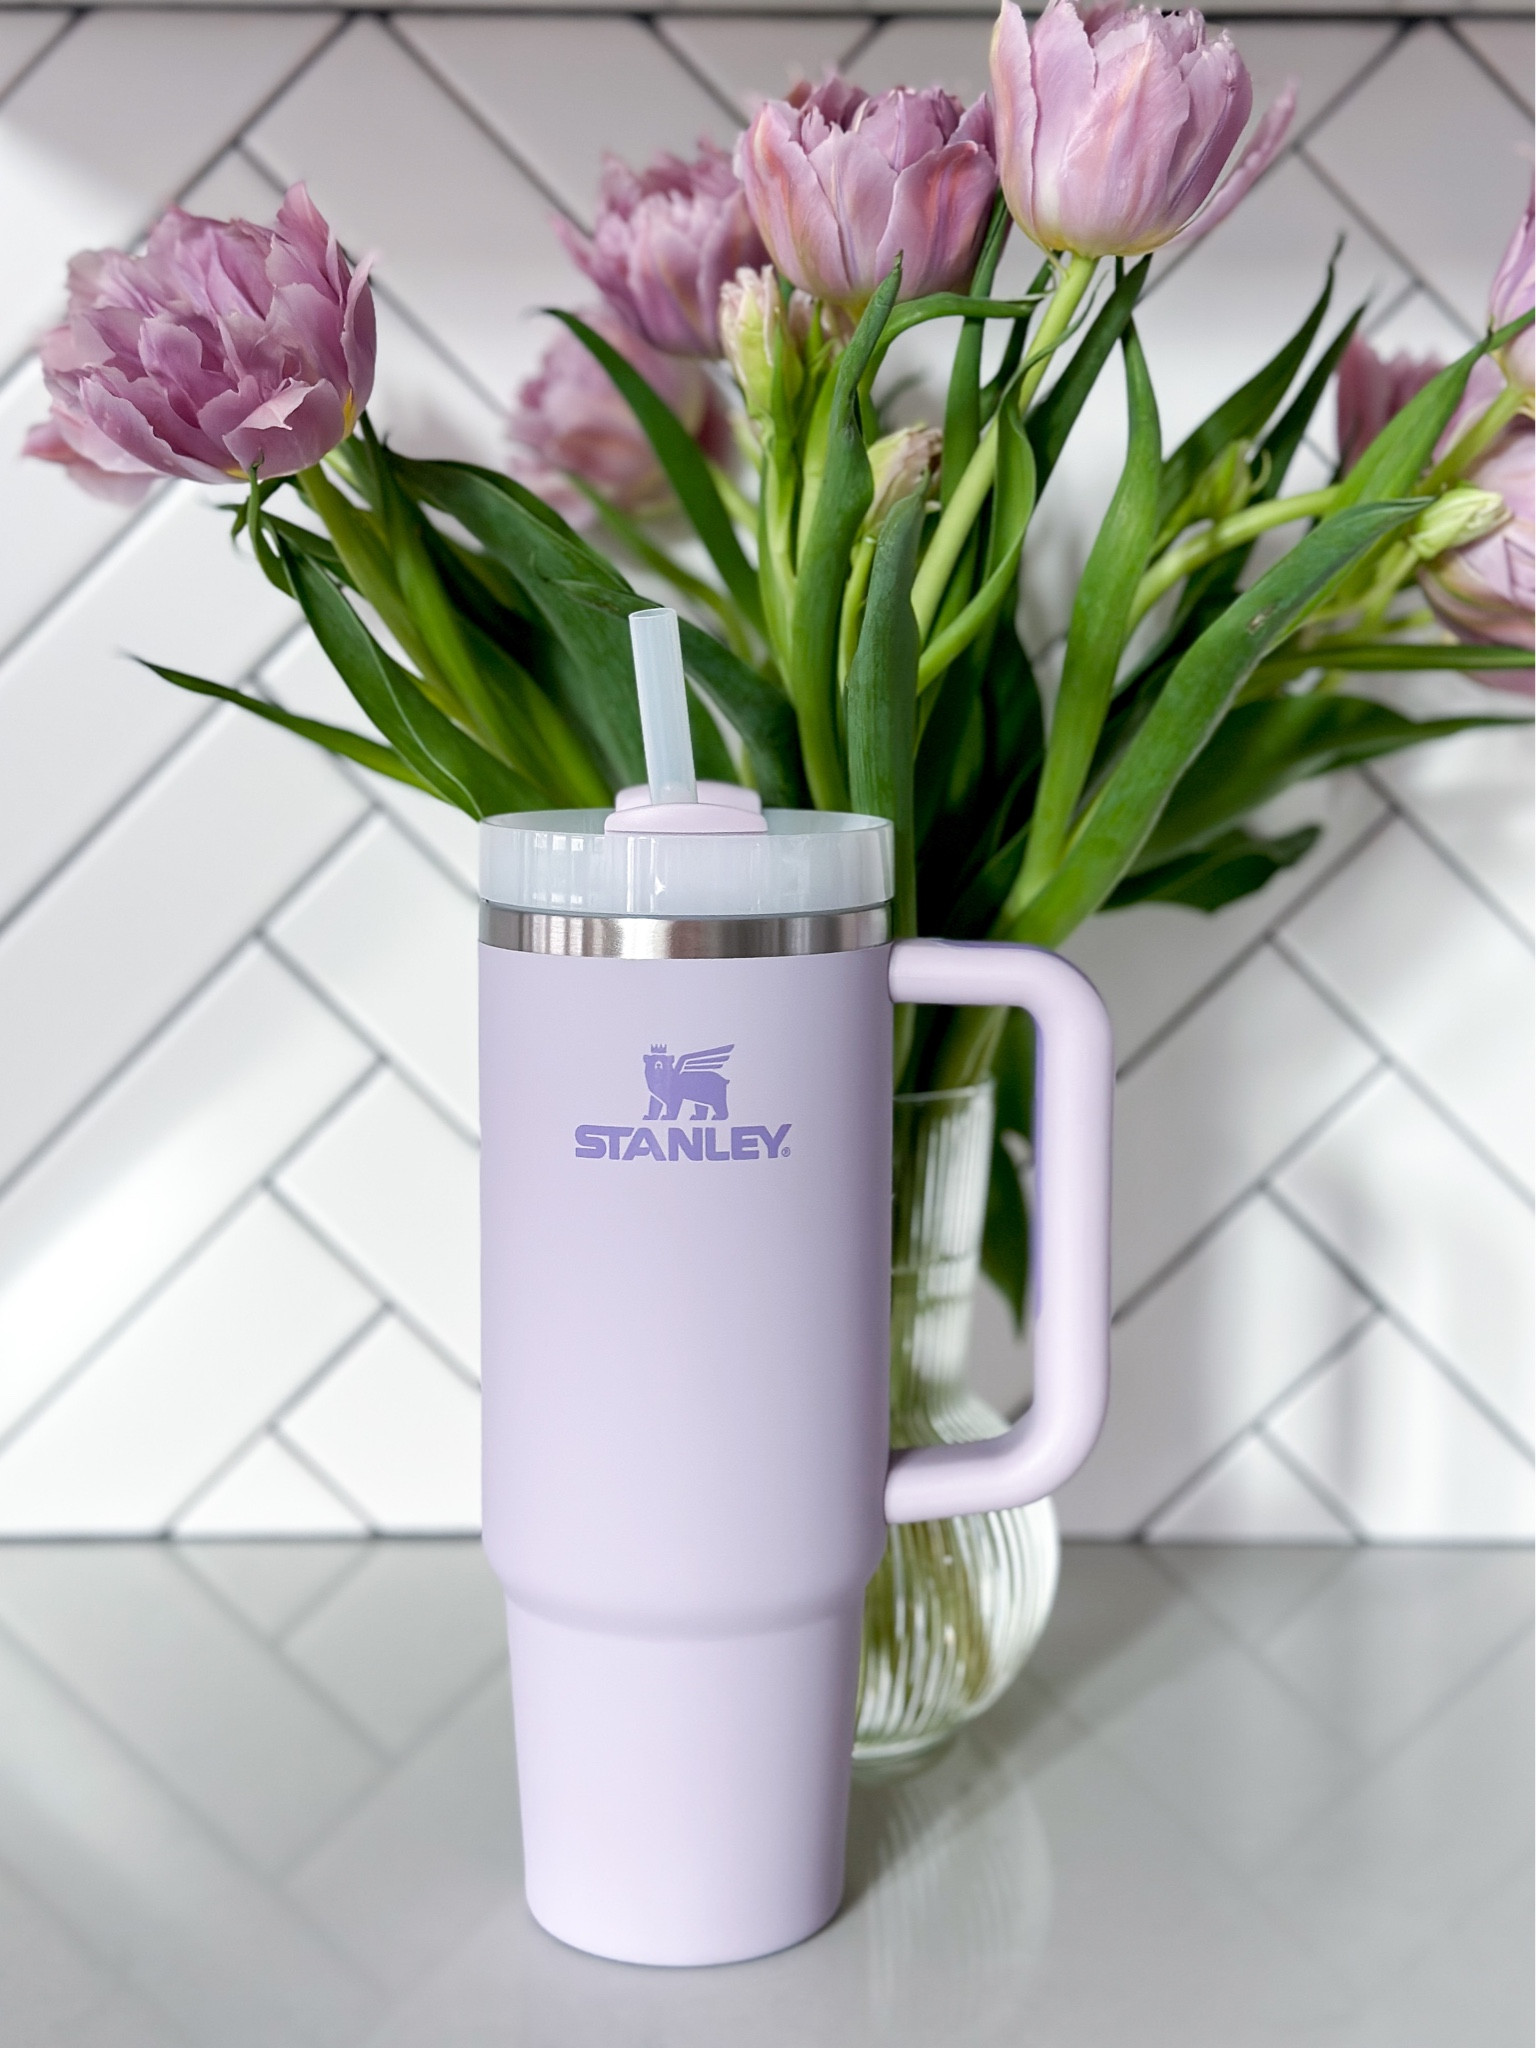 With color as soothing as its namesake, the Orchid Quencher H2.0